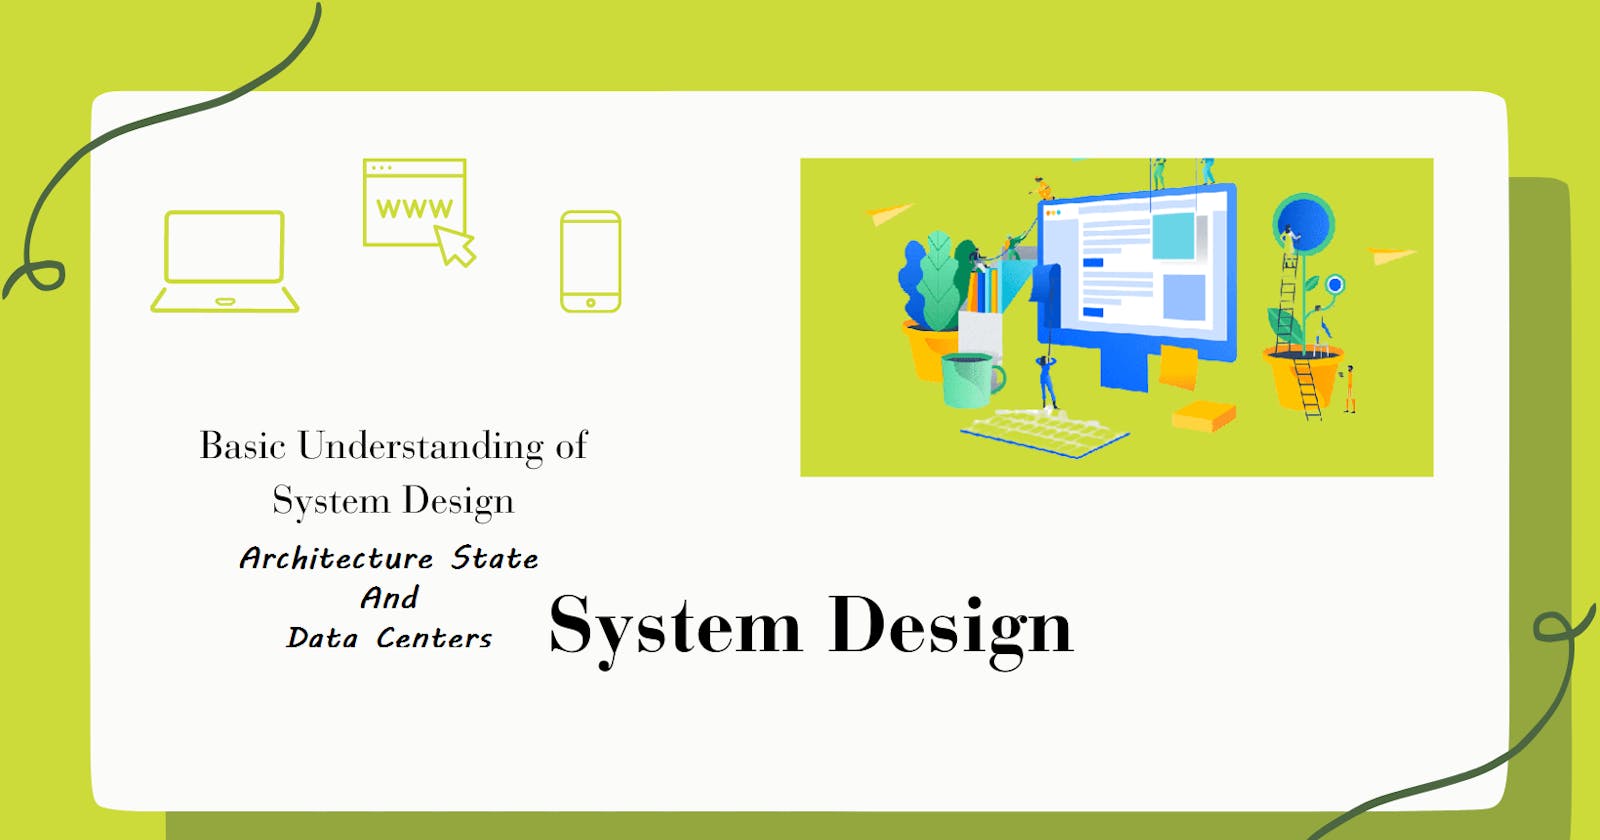 06 - System Design - Basic Understanding - Architecture State And Data Centers